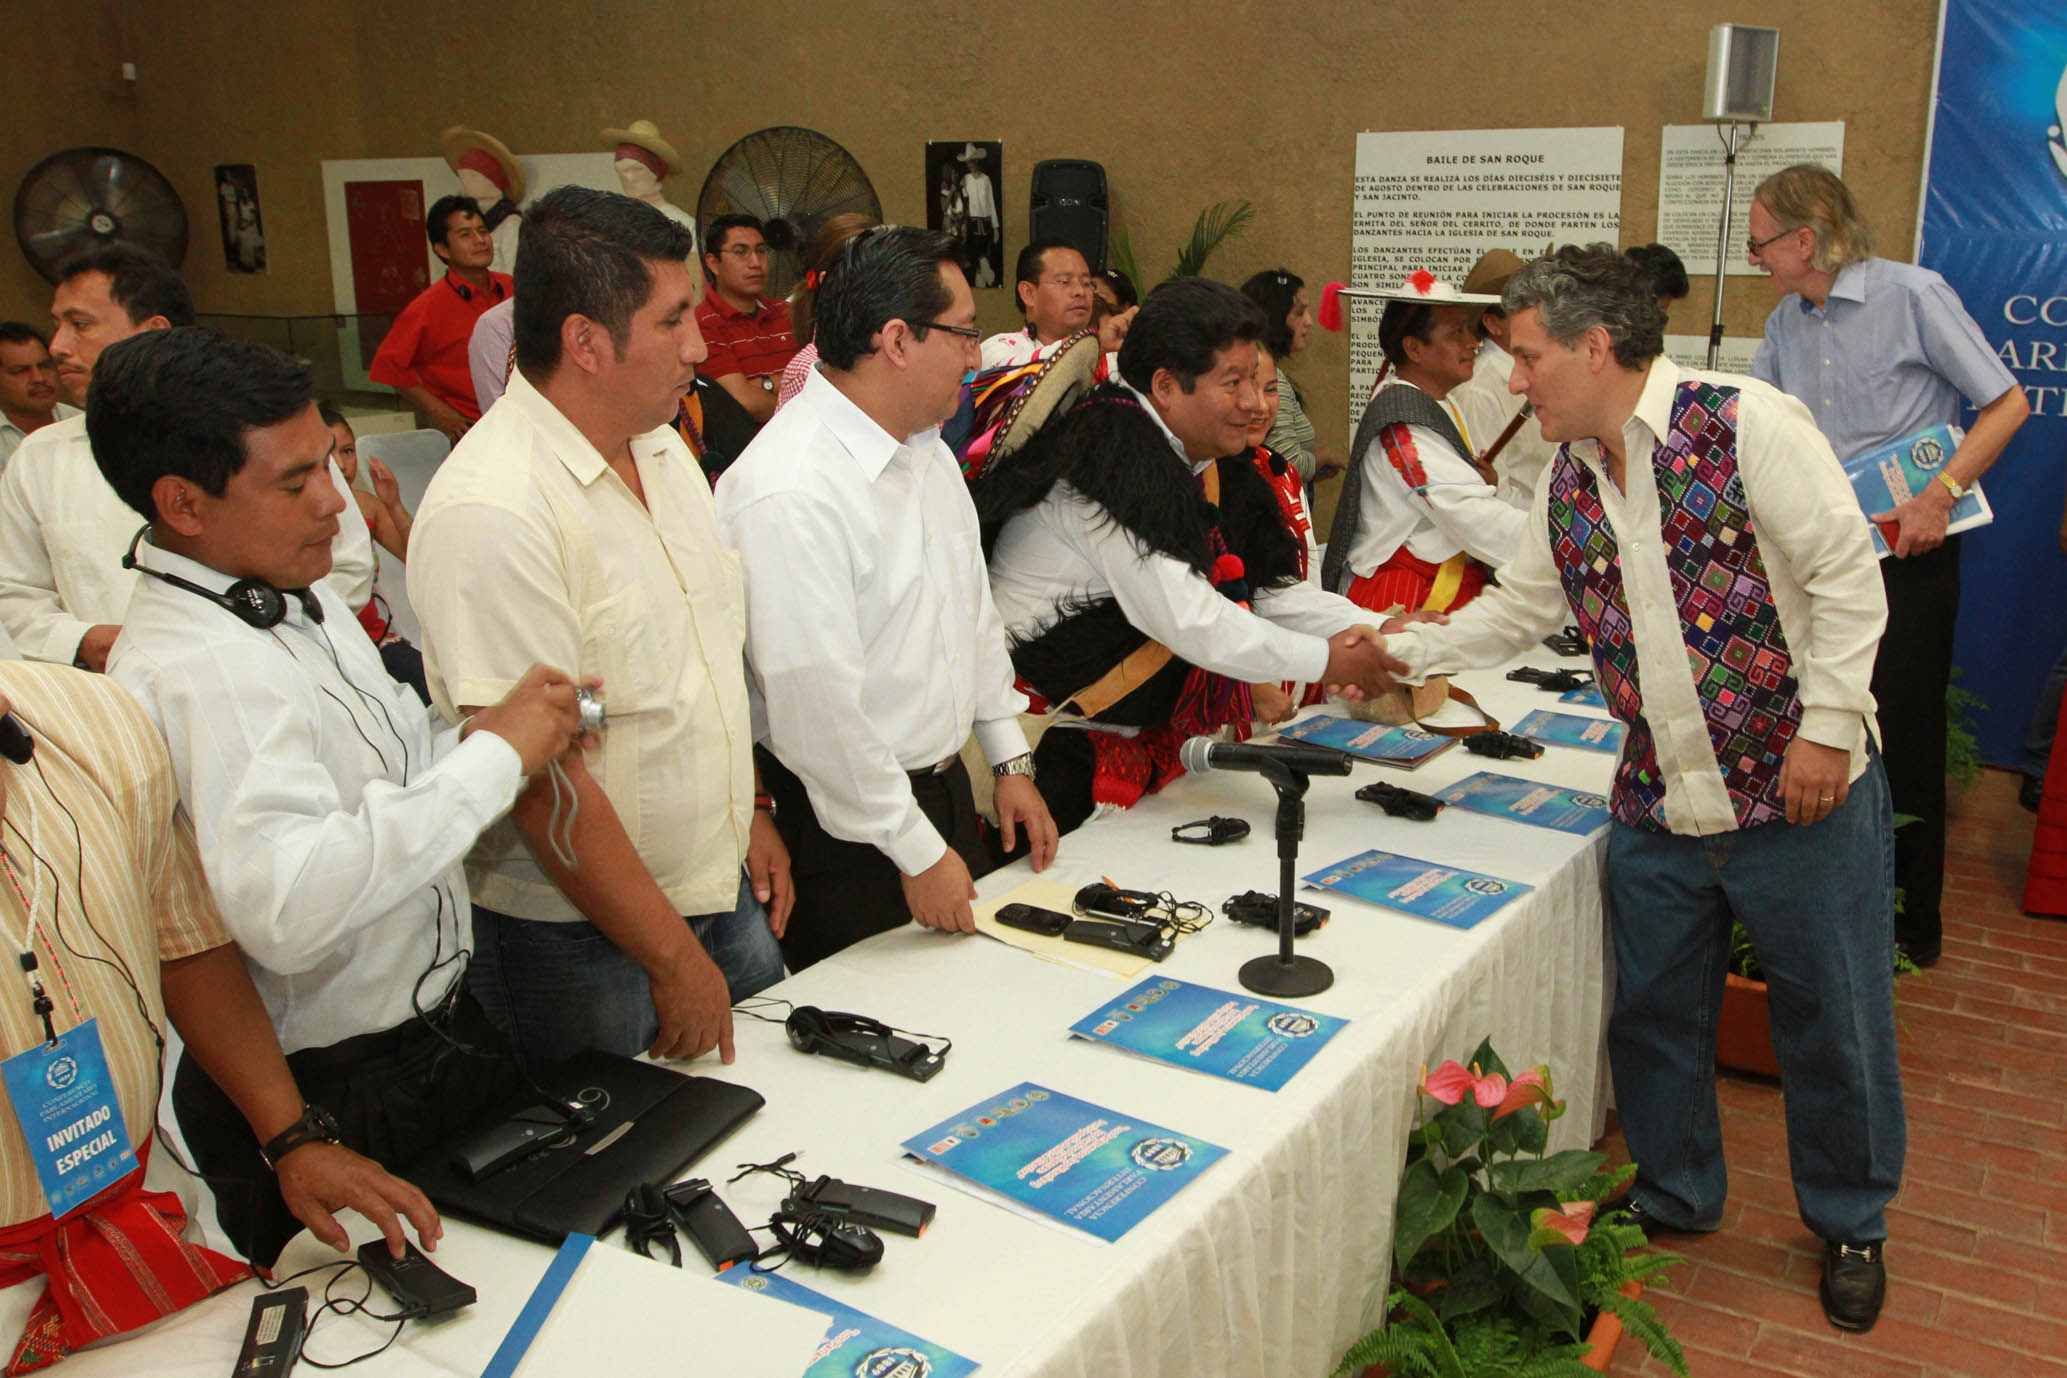 Dialogue between parliamentarians and indigenous leaders, Chiapas, Mexico (photo credit: Inter-Parliamentary Union/flickr)